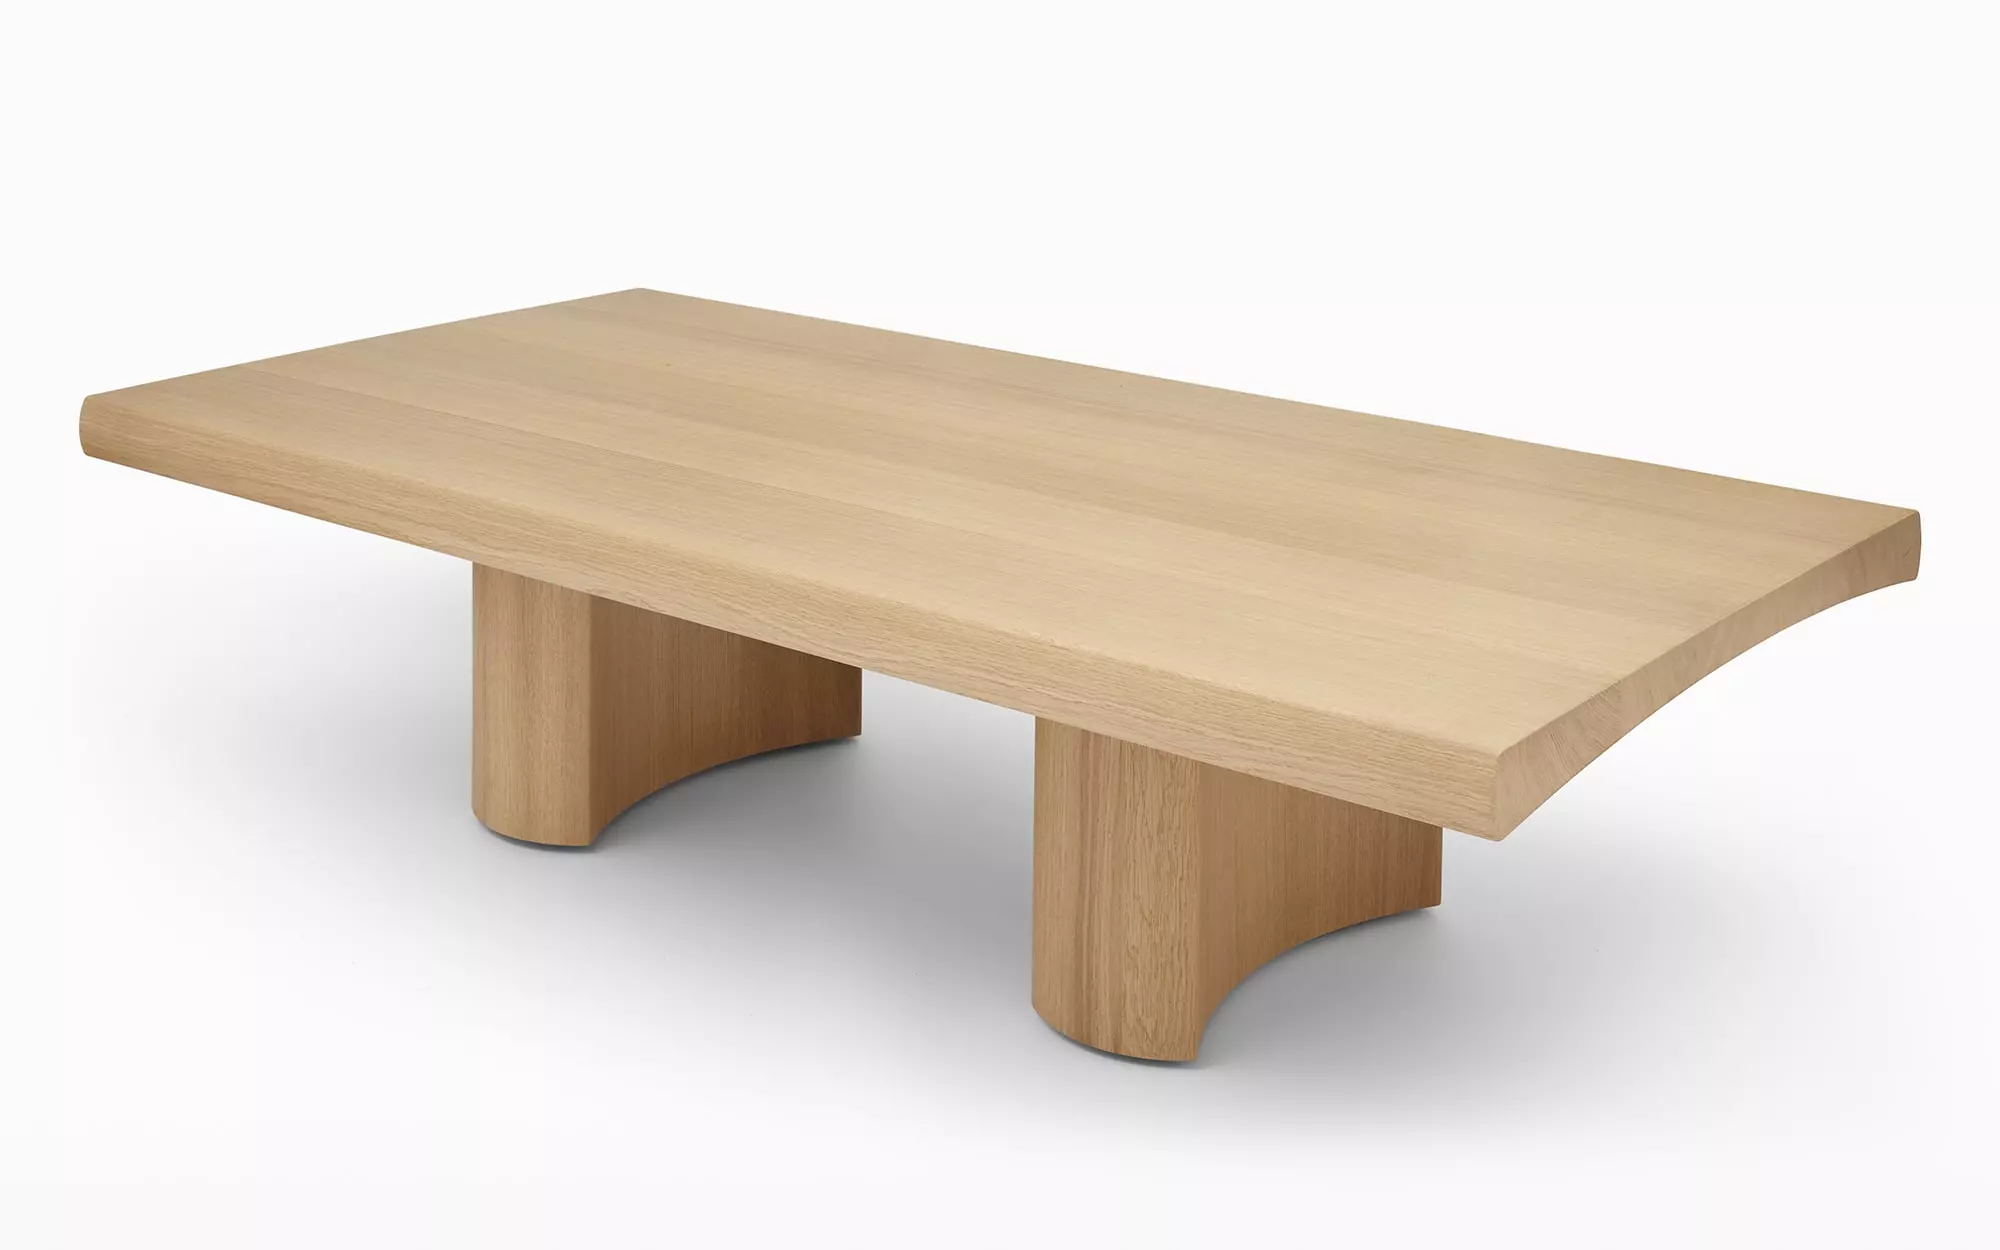 Hakone Coffee table - Edward Barber and Jay Osgerby - Miscellaneous - Galerie kreo